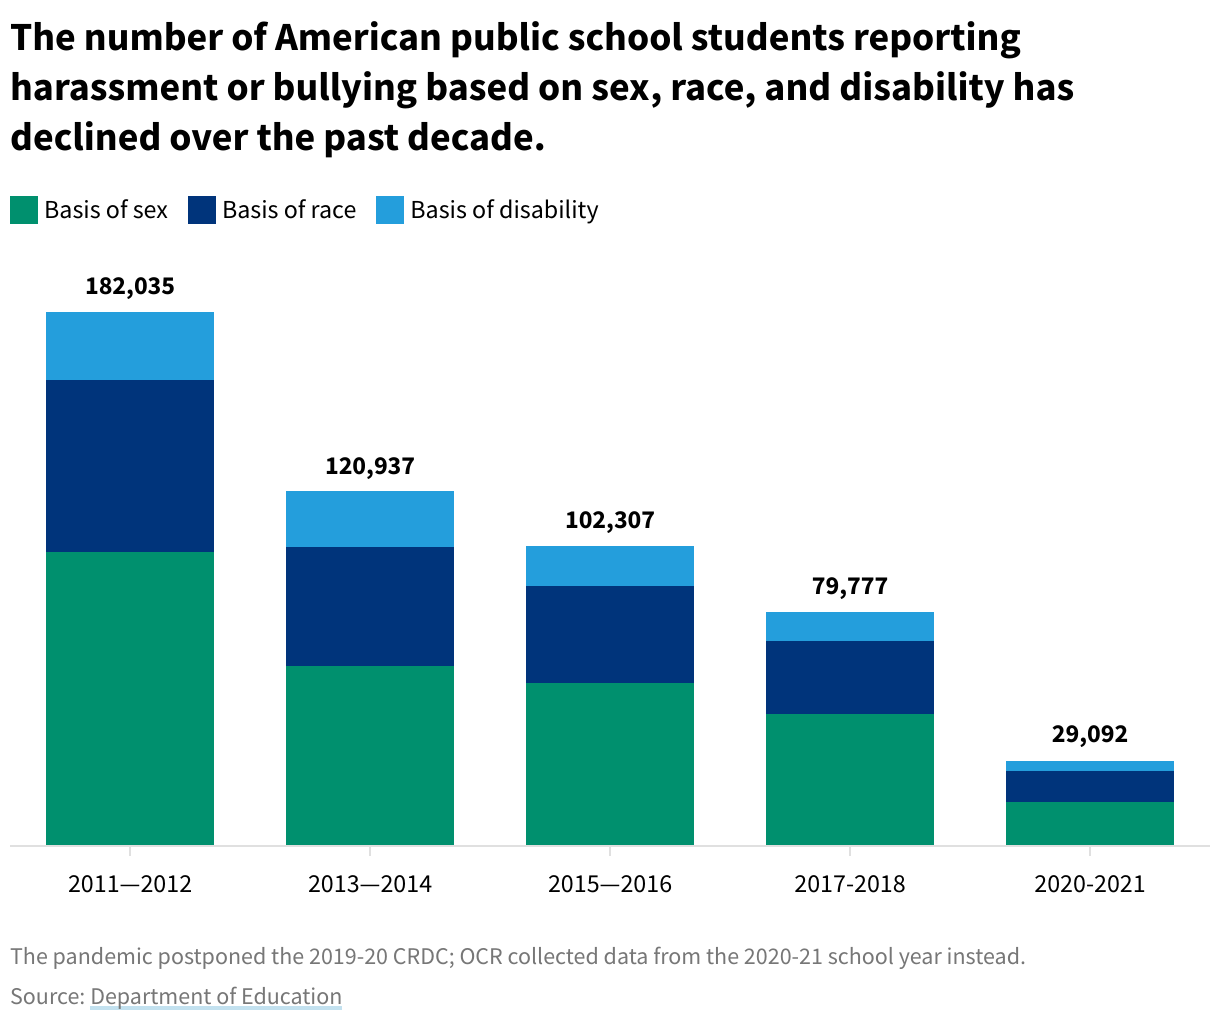 Stacked bar chart showing the number of American public school students reporting harassment or bullying based on sex, race, and disability, starting in the 2011-2012 school year and ending in the 2020-2021. The chart shows an 84% decrease in reported harassment or bullying in the last decade. 